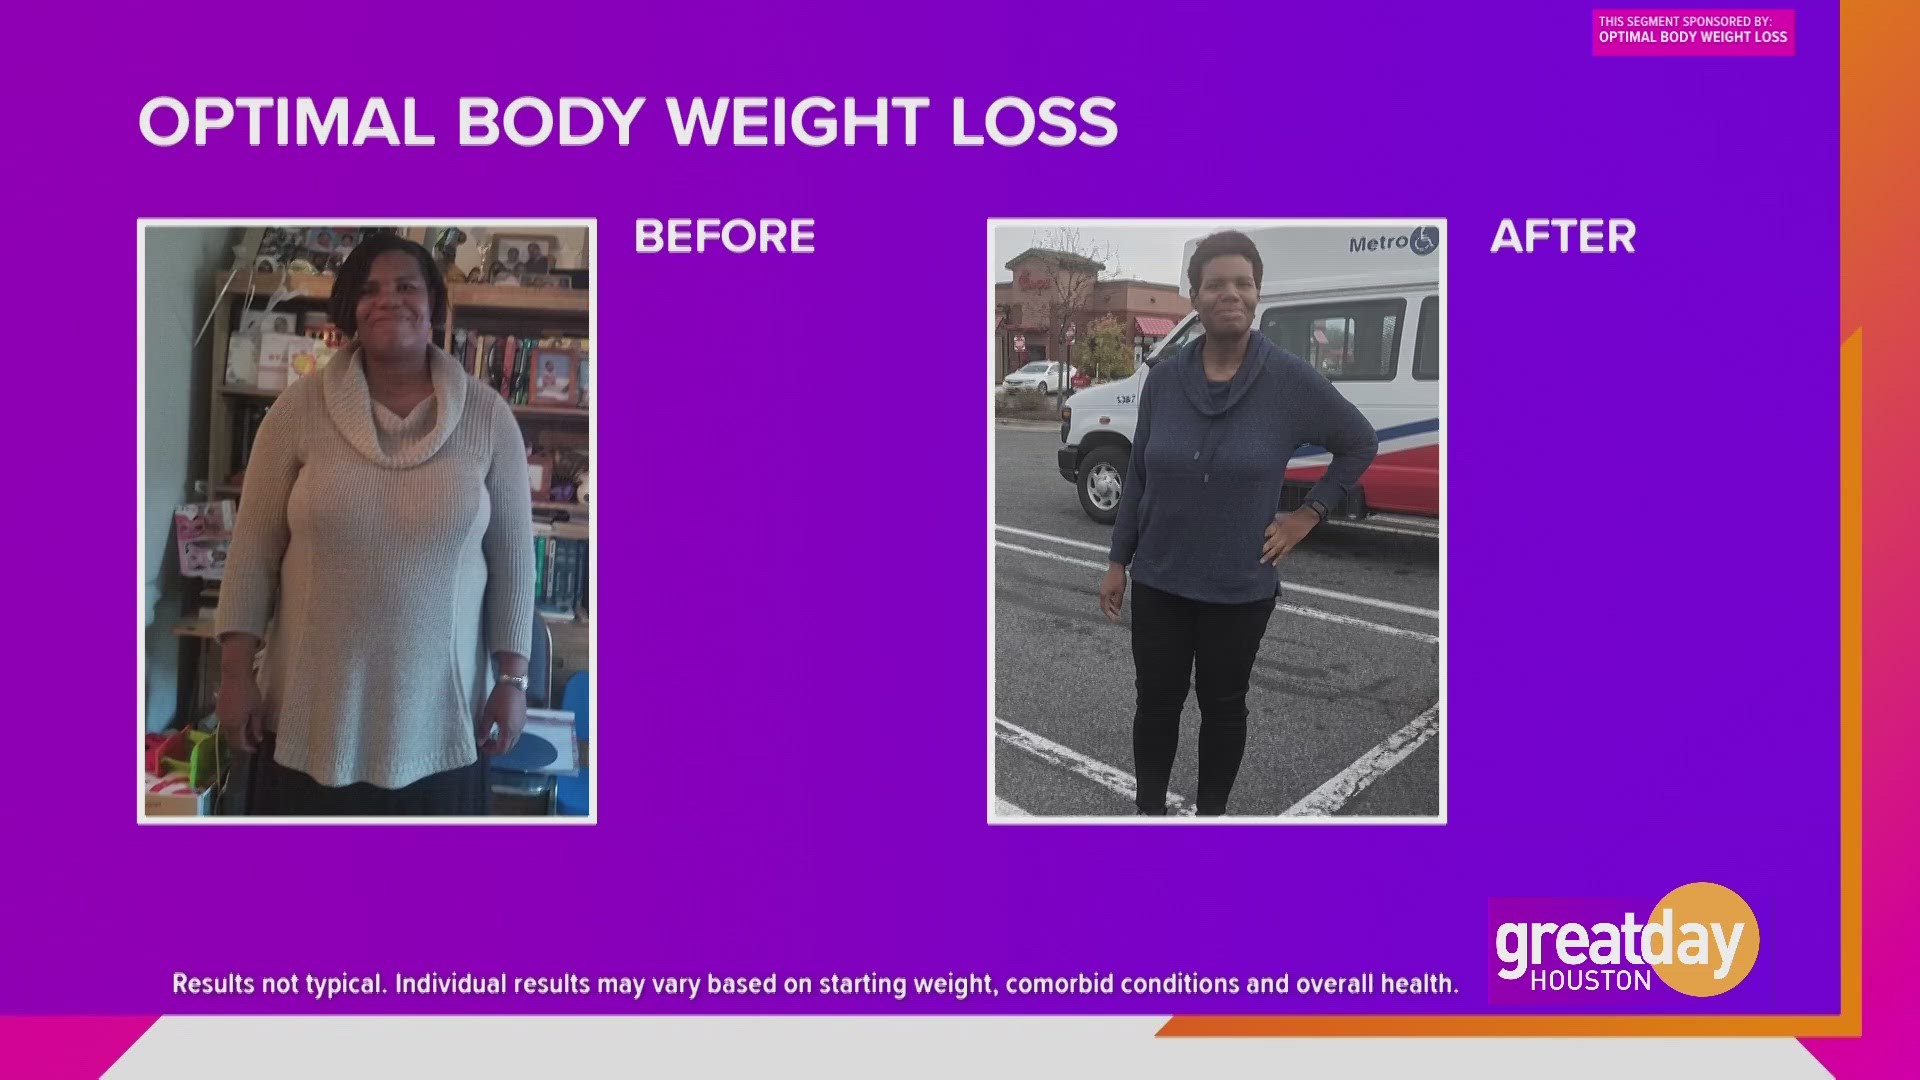 Optimal Body Weight Loss creates programs that are simple to follow for dramatic results